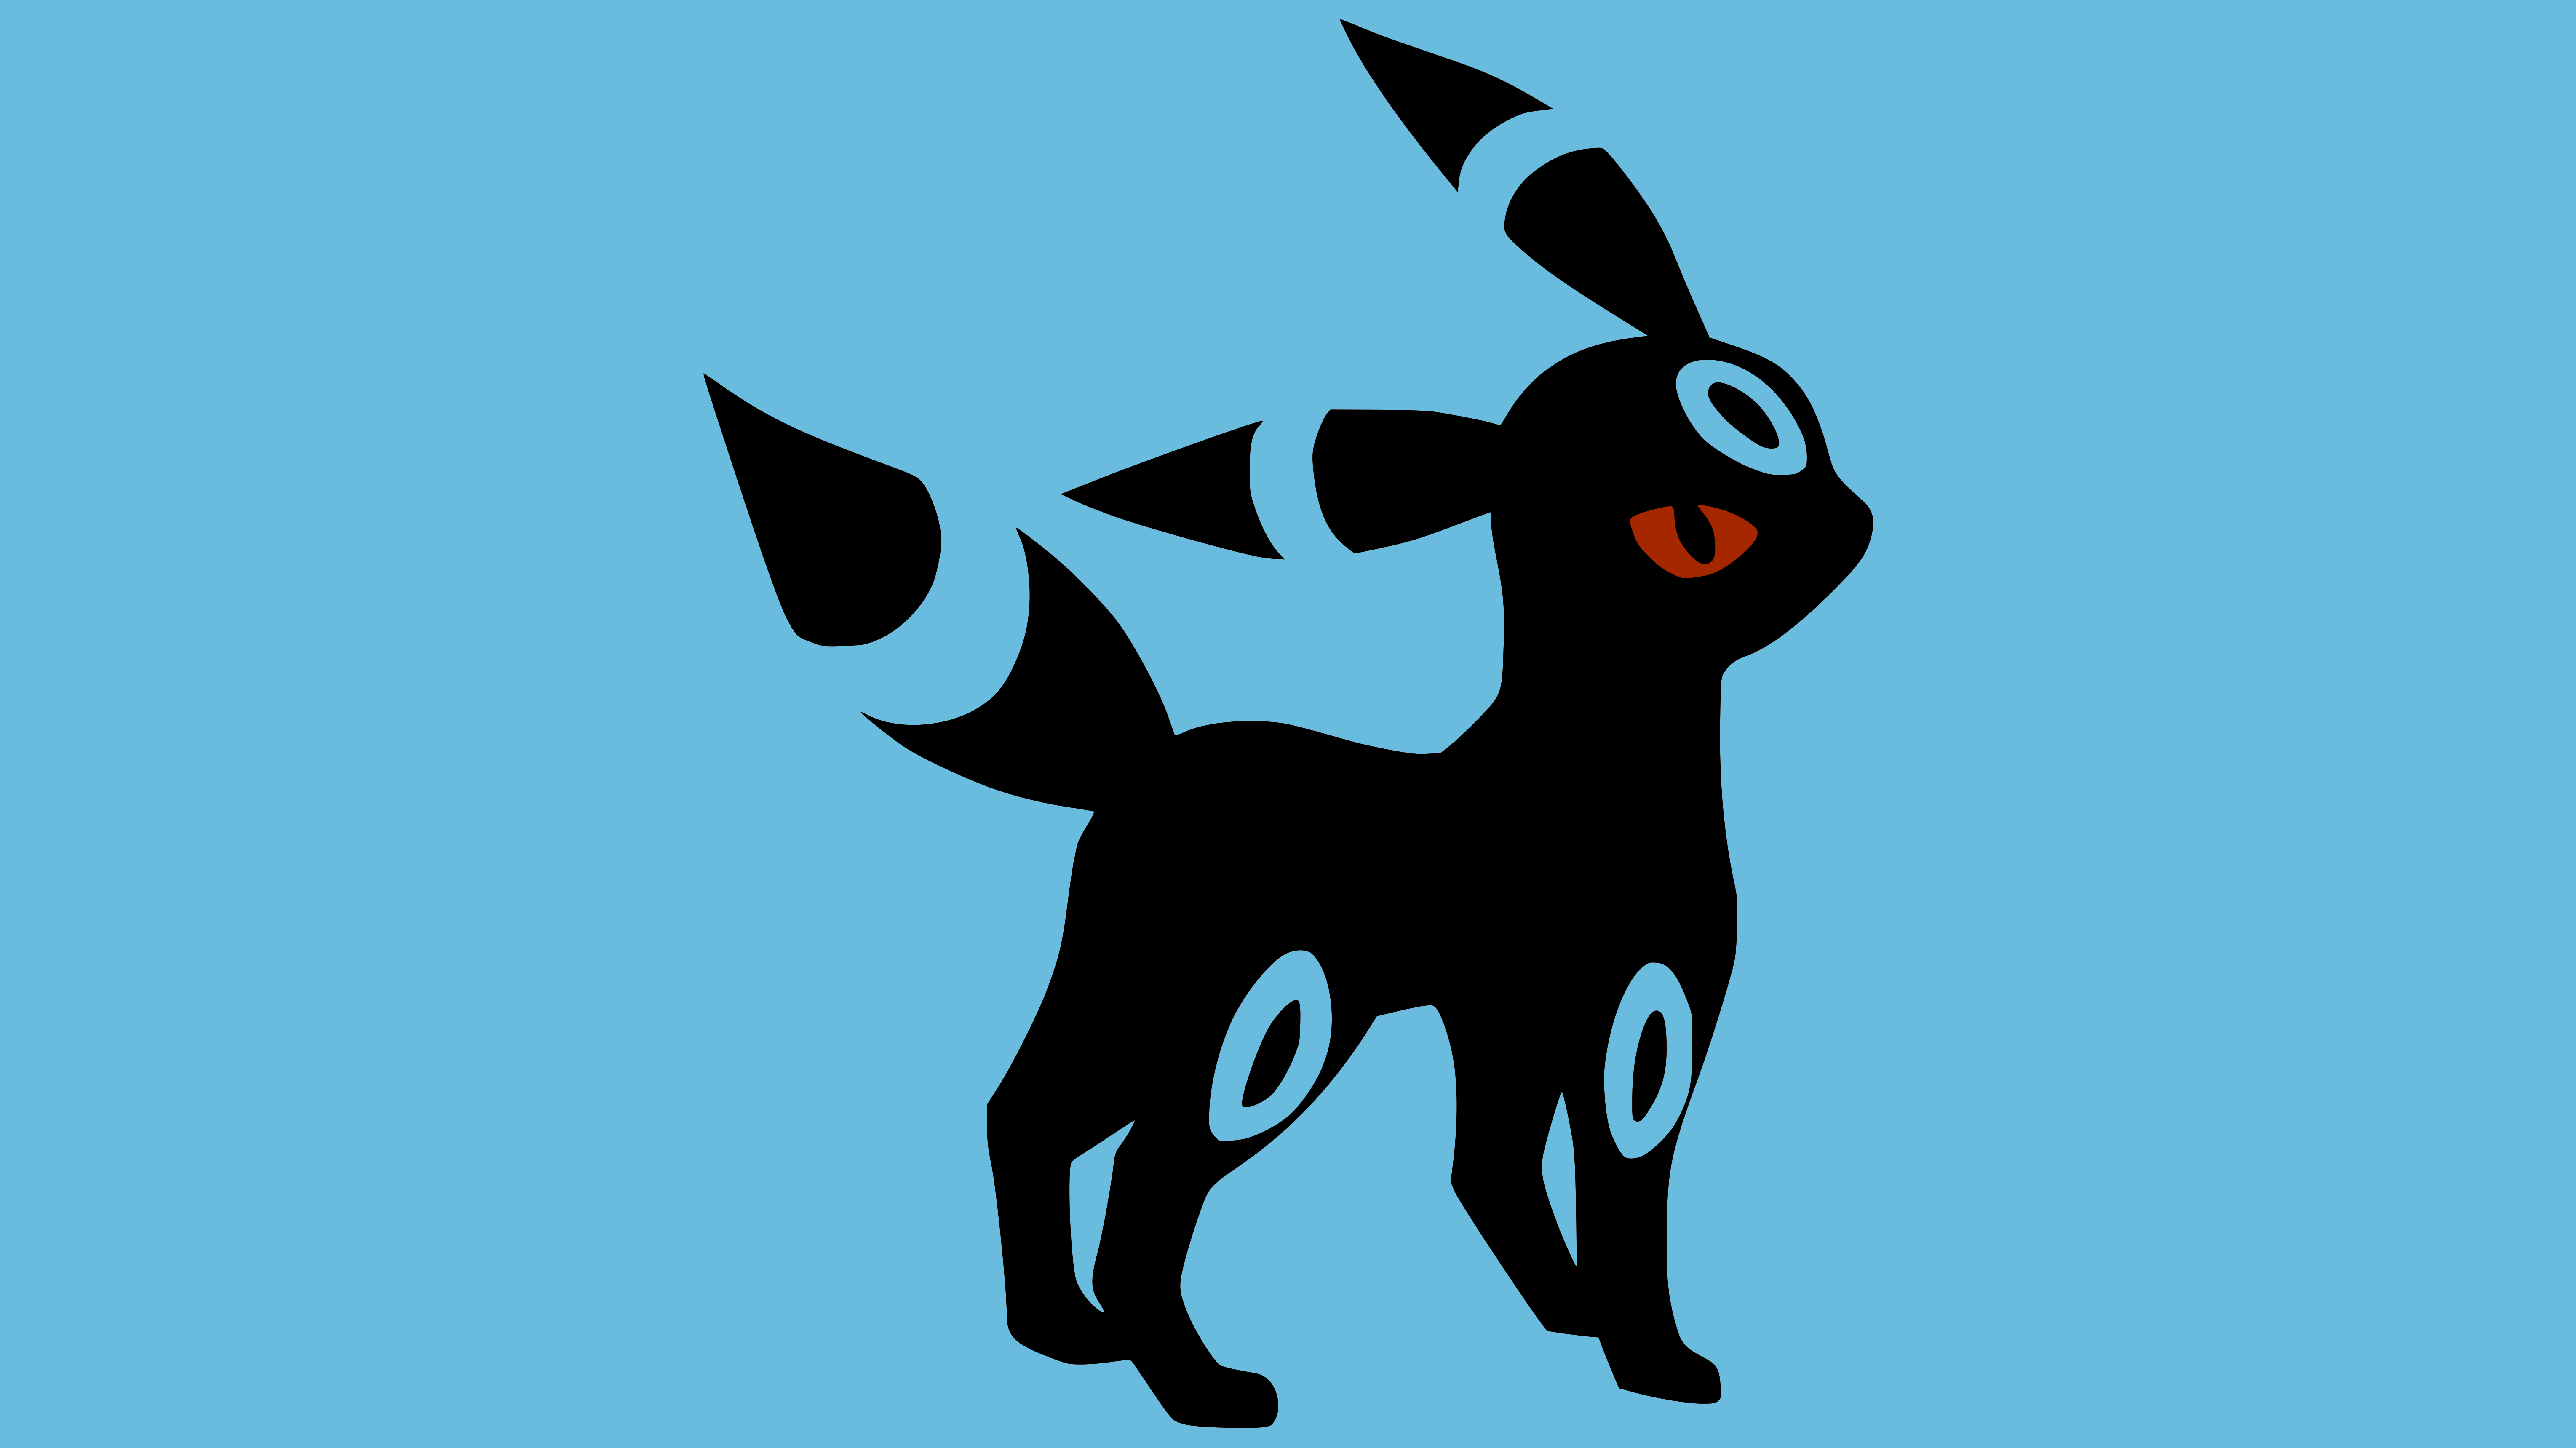 Shiny Umbreon Wallpapers by DamionMauville.